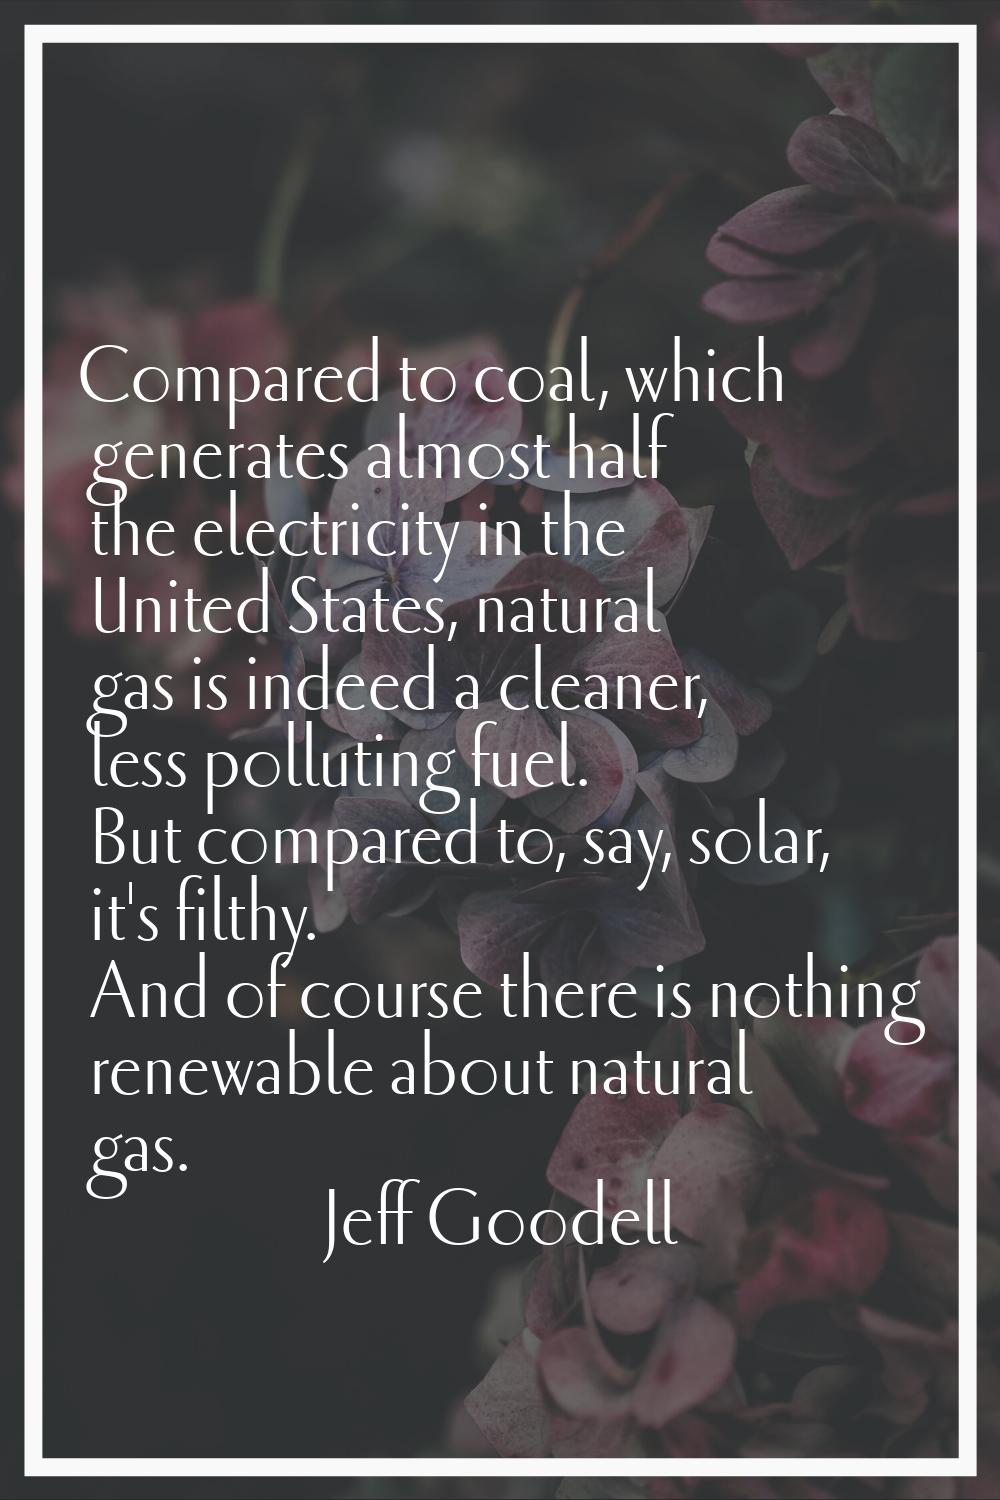 Compared to coal, which generates almost half the electricity in the United States, natural gas is 